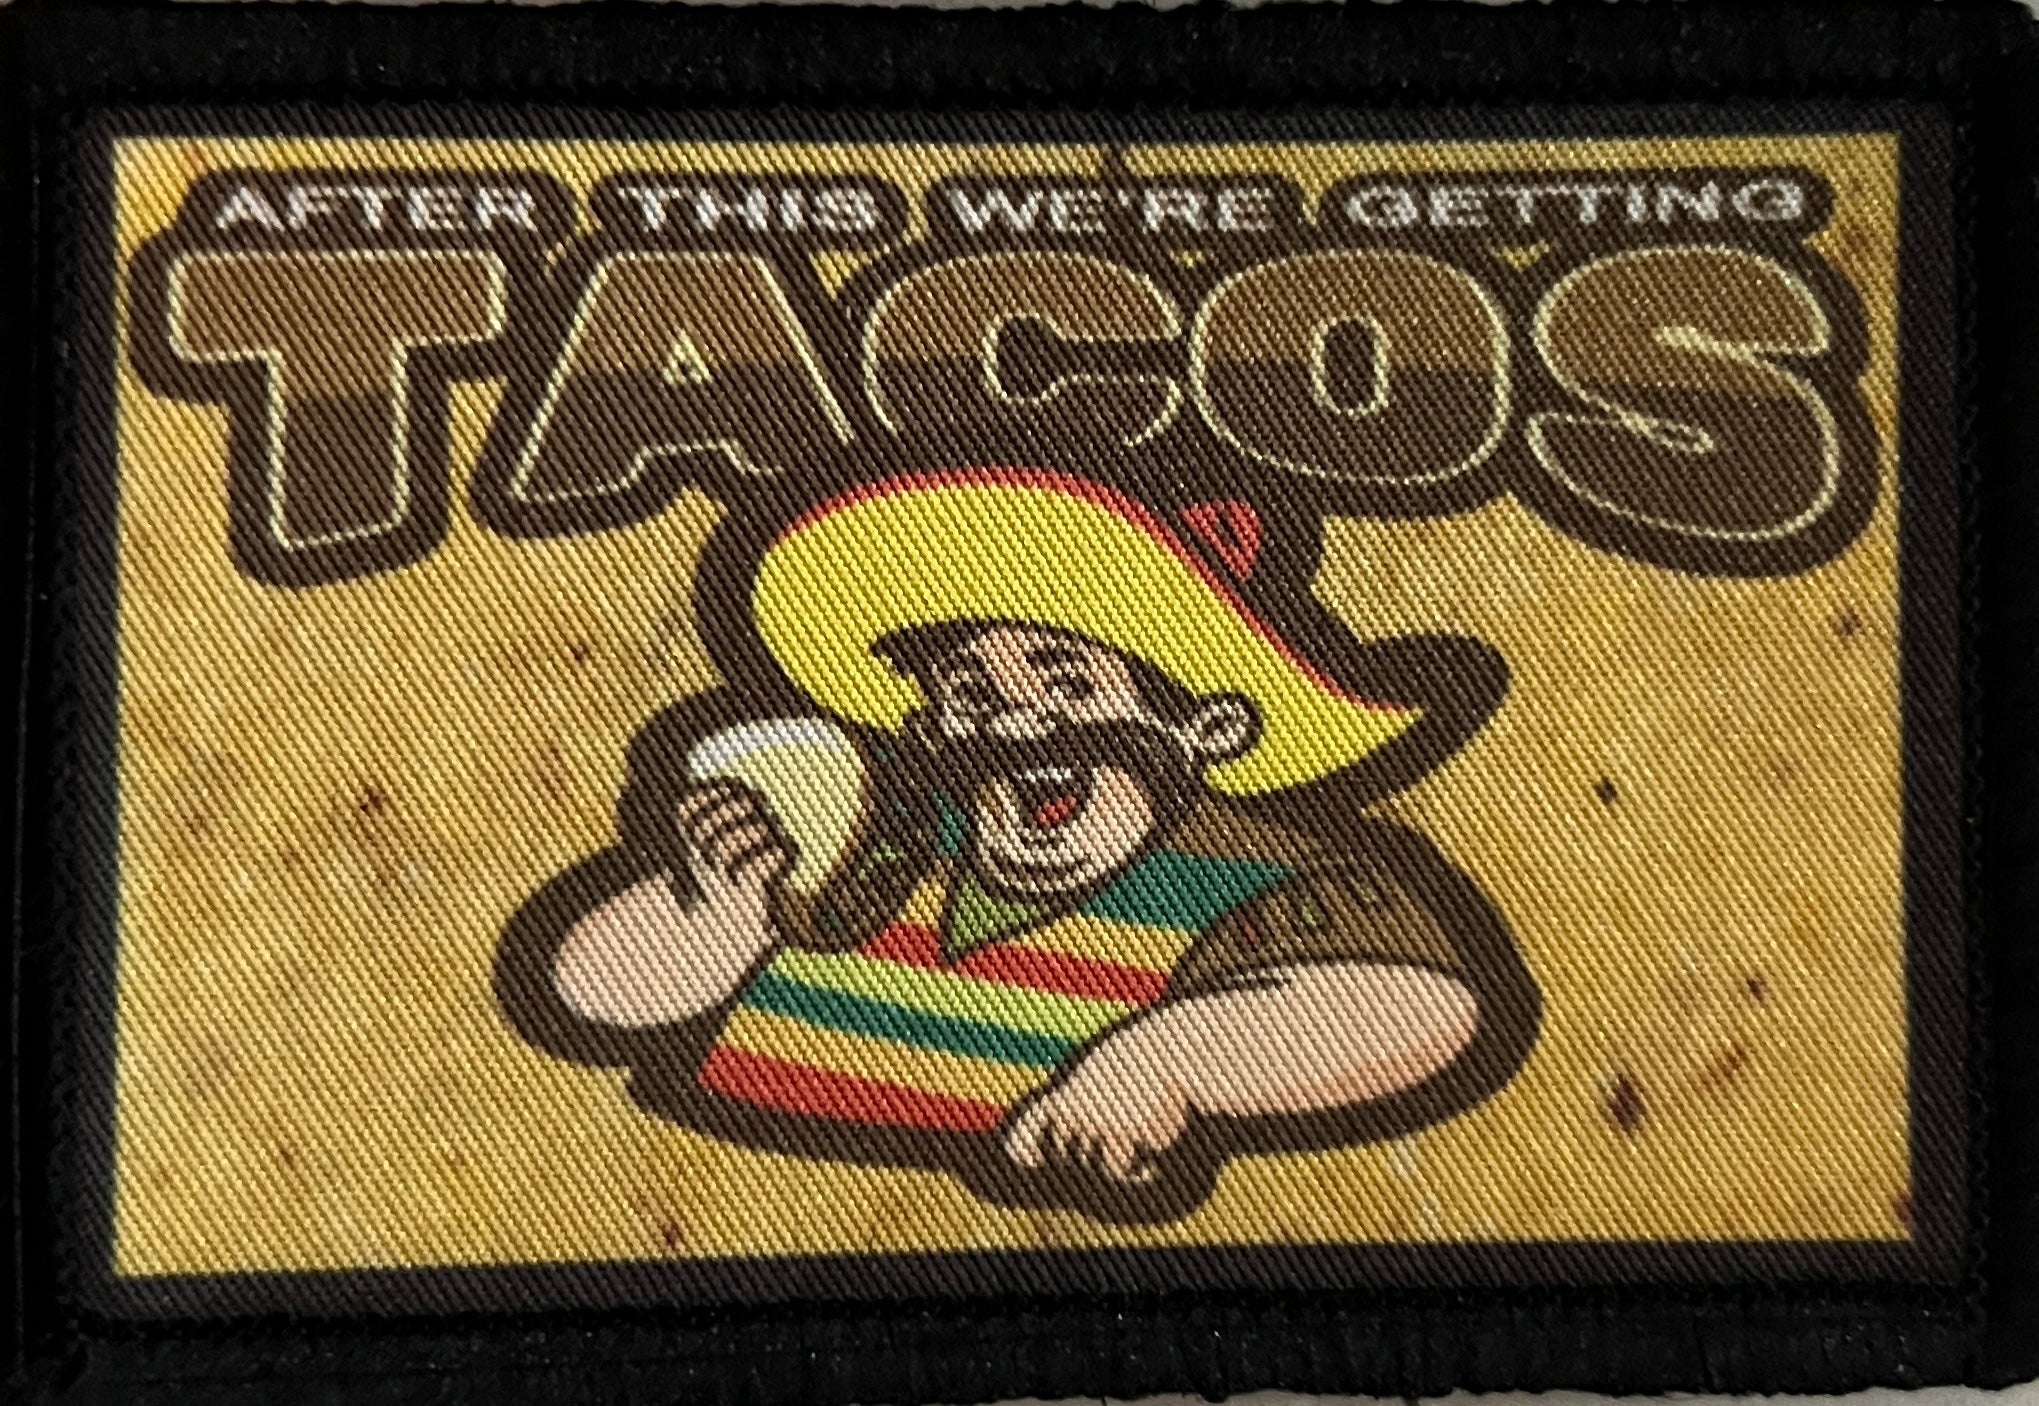 After This we're getting tacos velcro morale patch